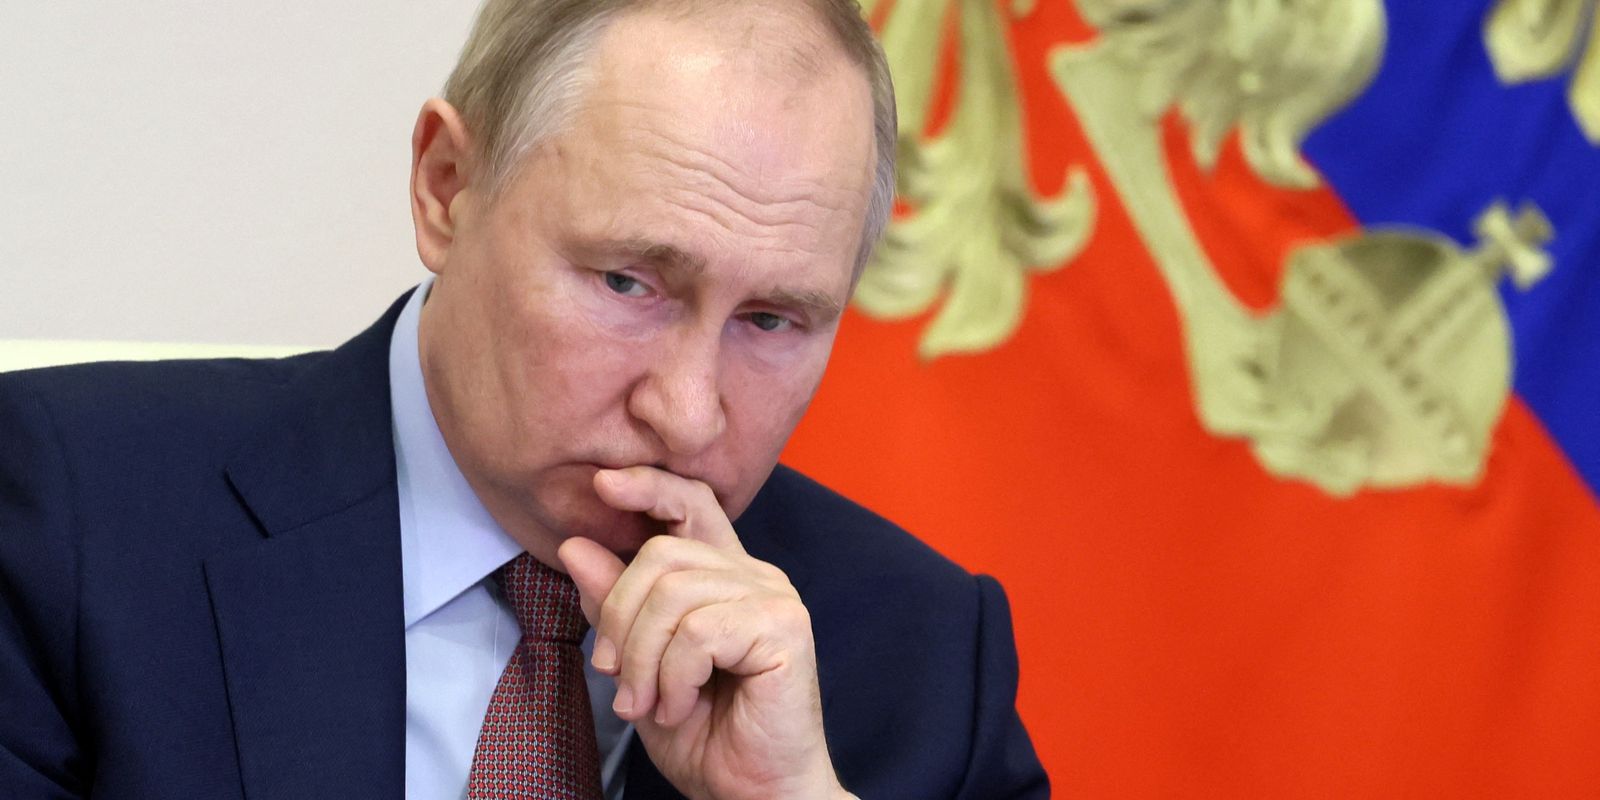 Putin claims "positive dynamics" to Russia in Ukraine